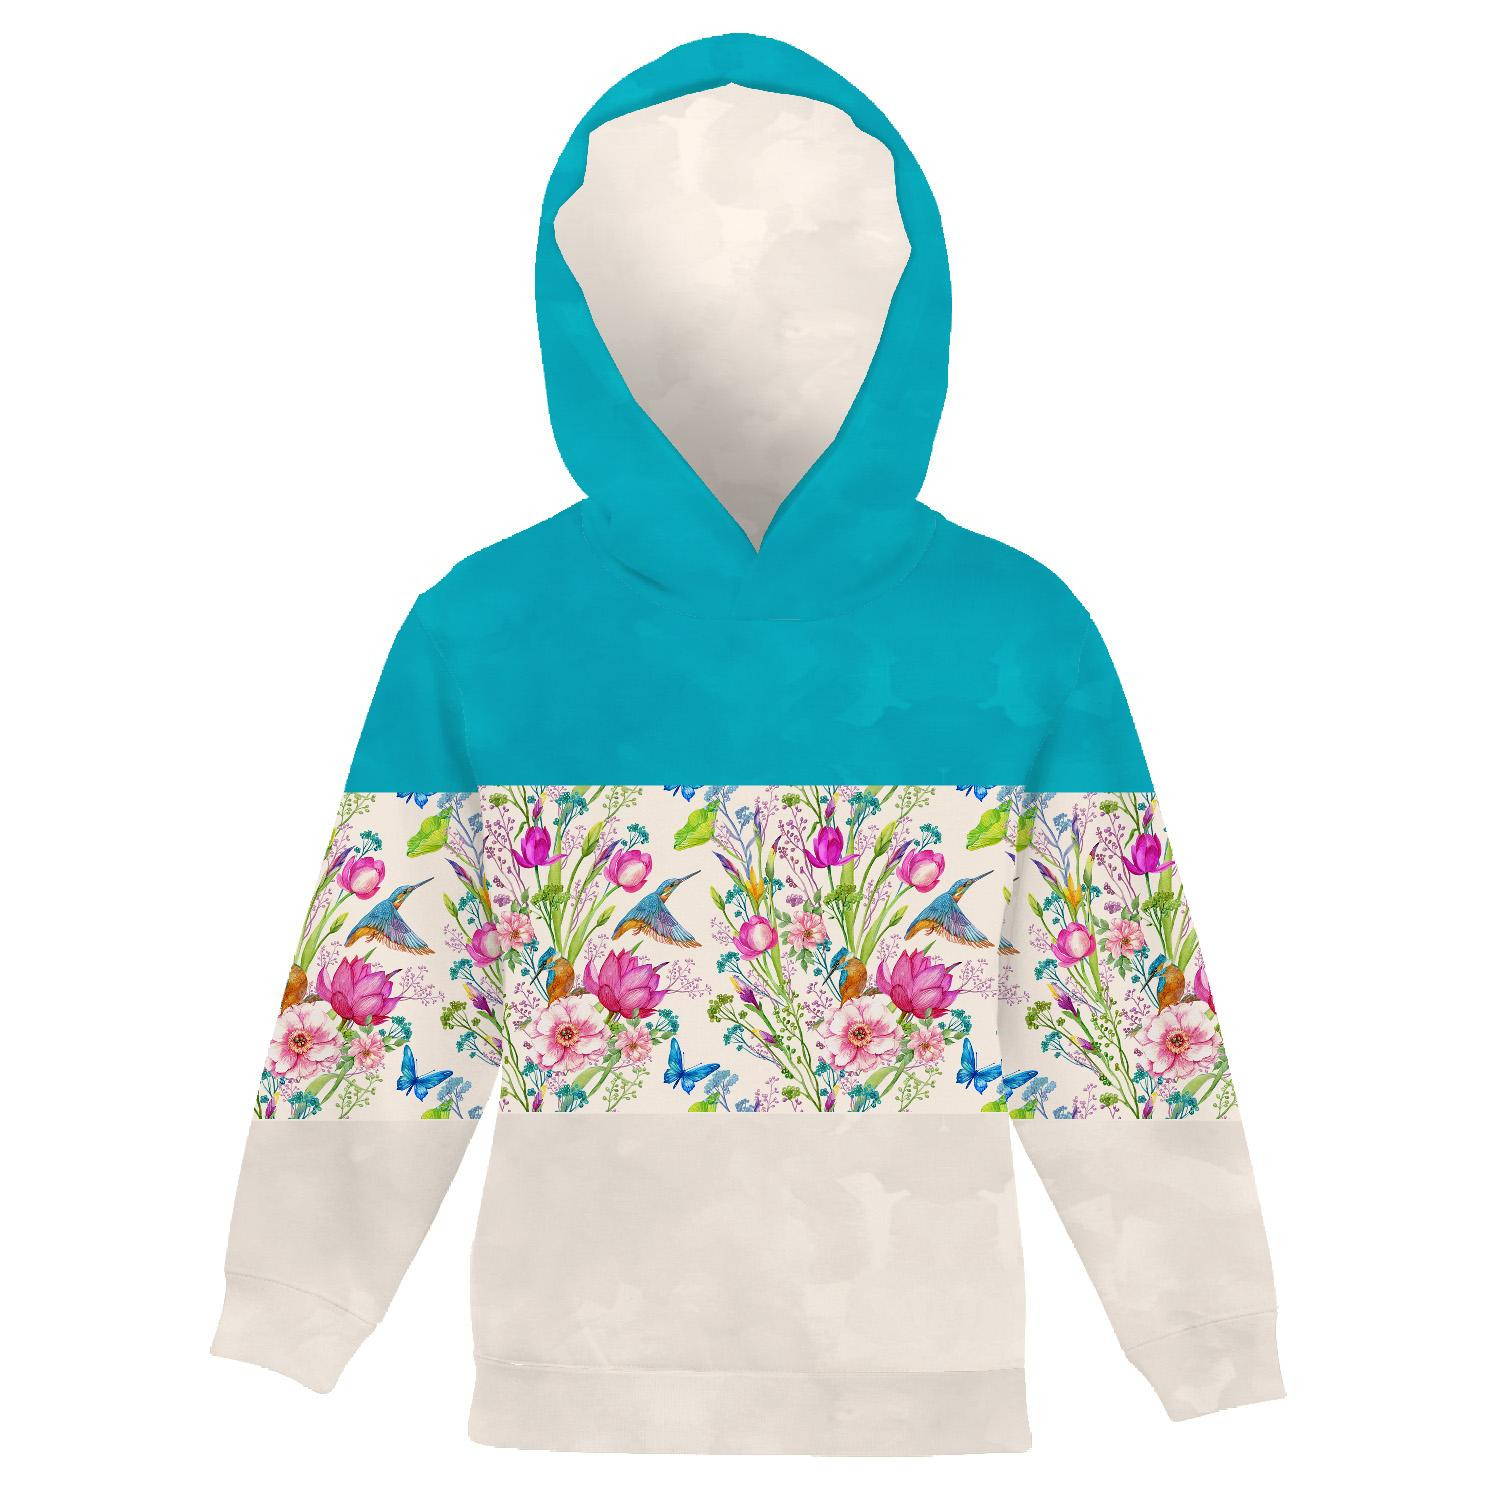 KID'S HOODIE (ALEX) - KINGFISHERS (KINGFISHERS IN THE MEADOW) / STRIPES - sewing set